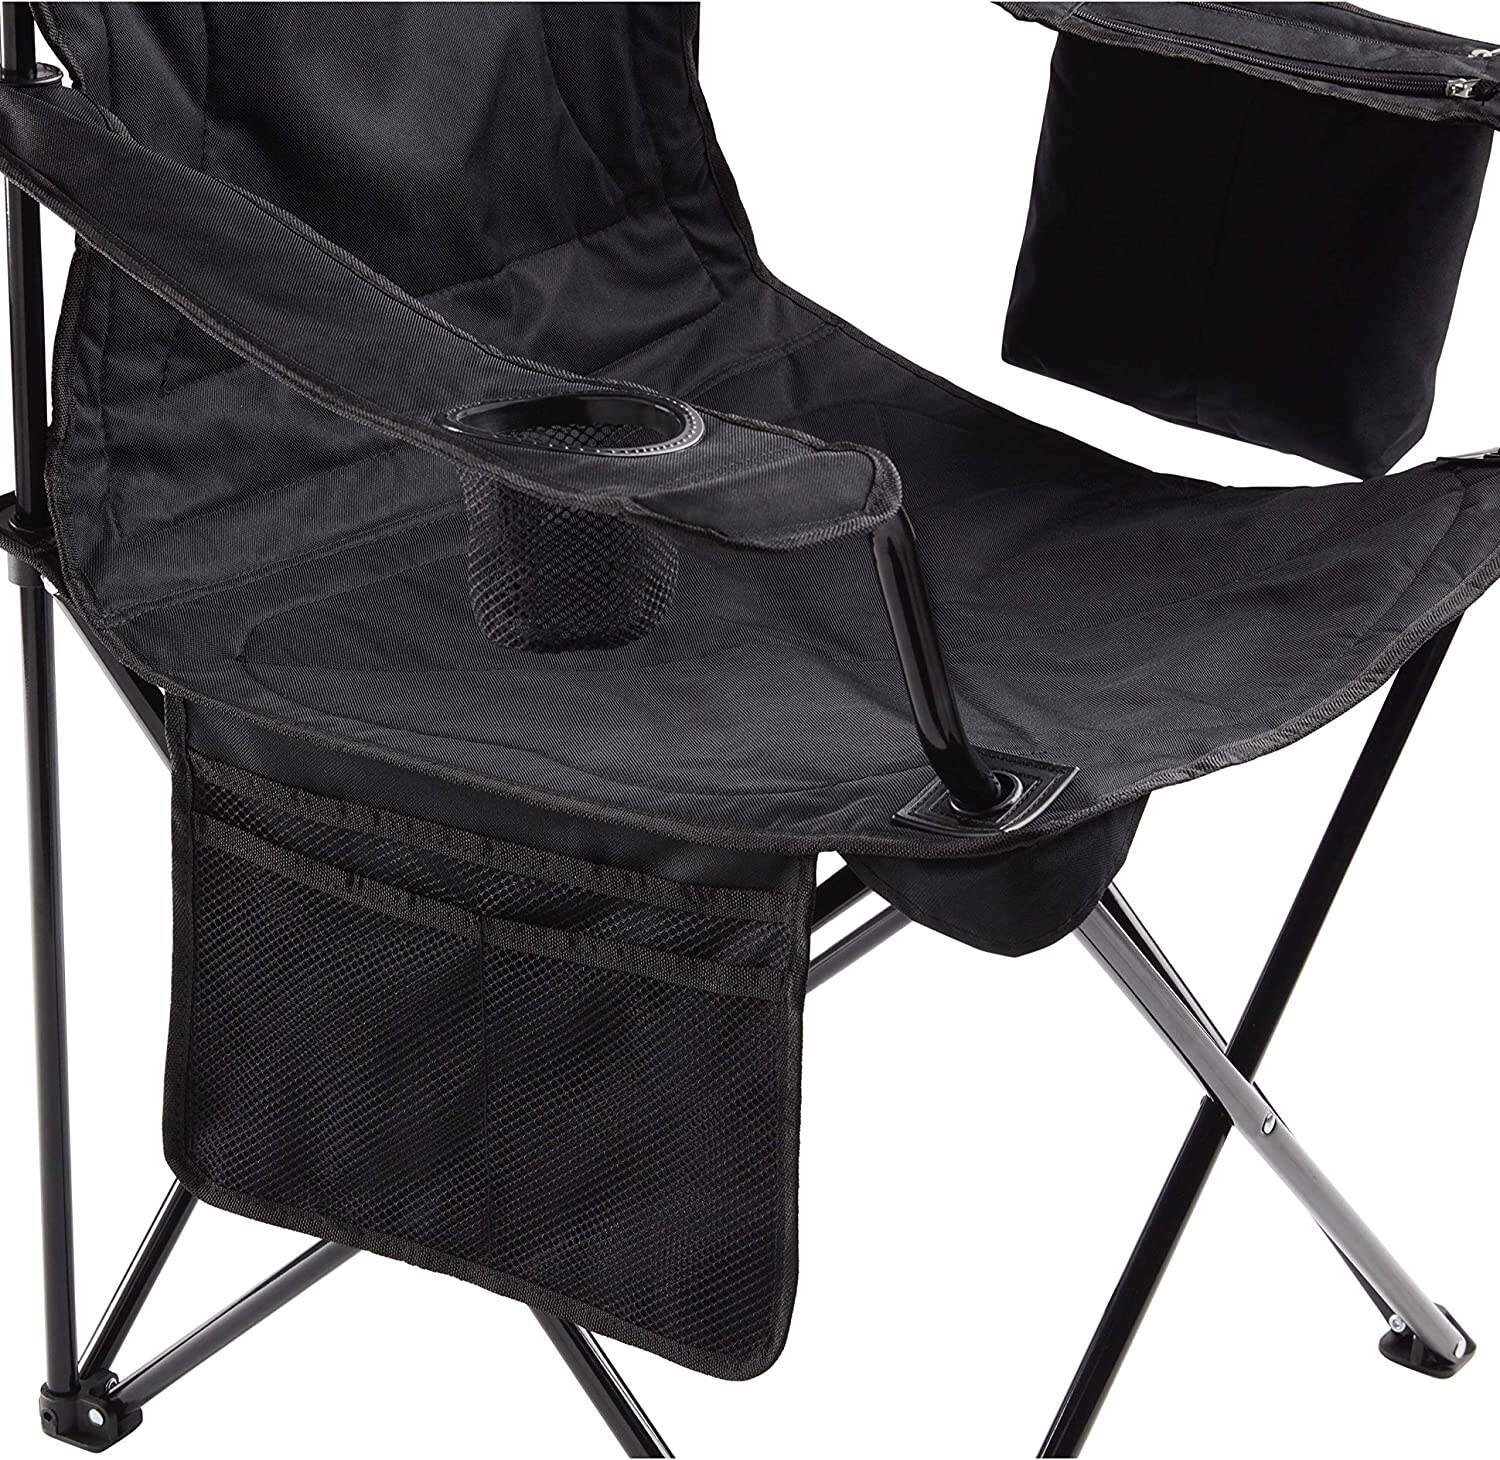 Camping Chair with Built-in 4 Can Cooler